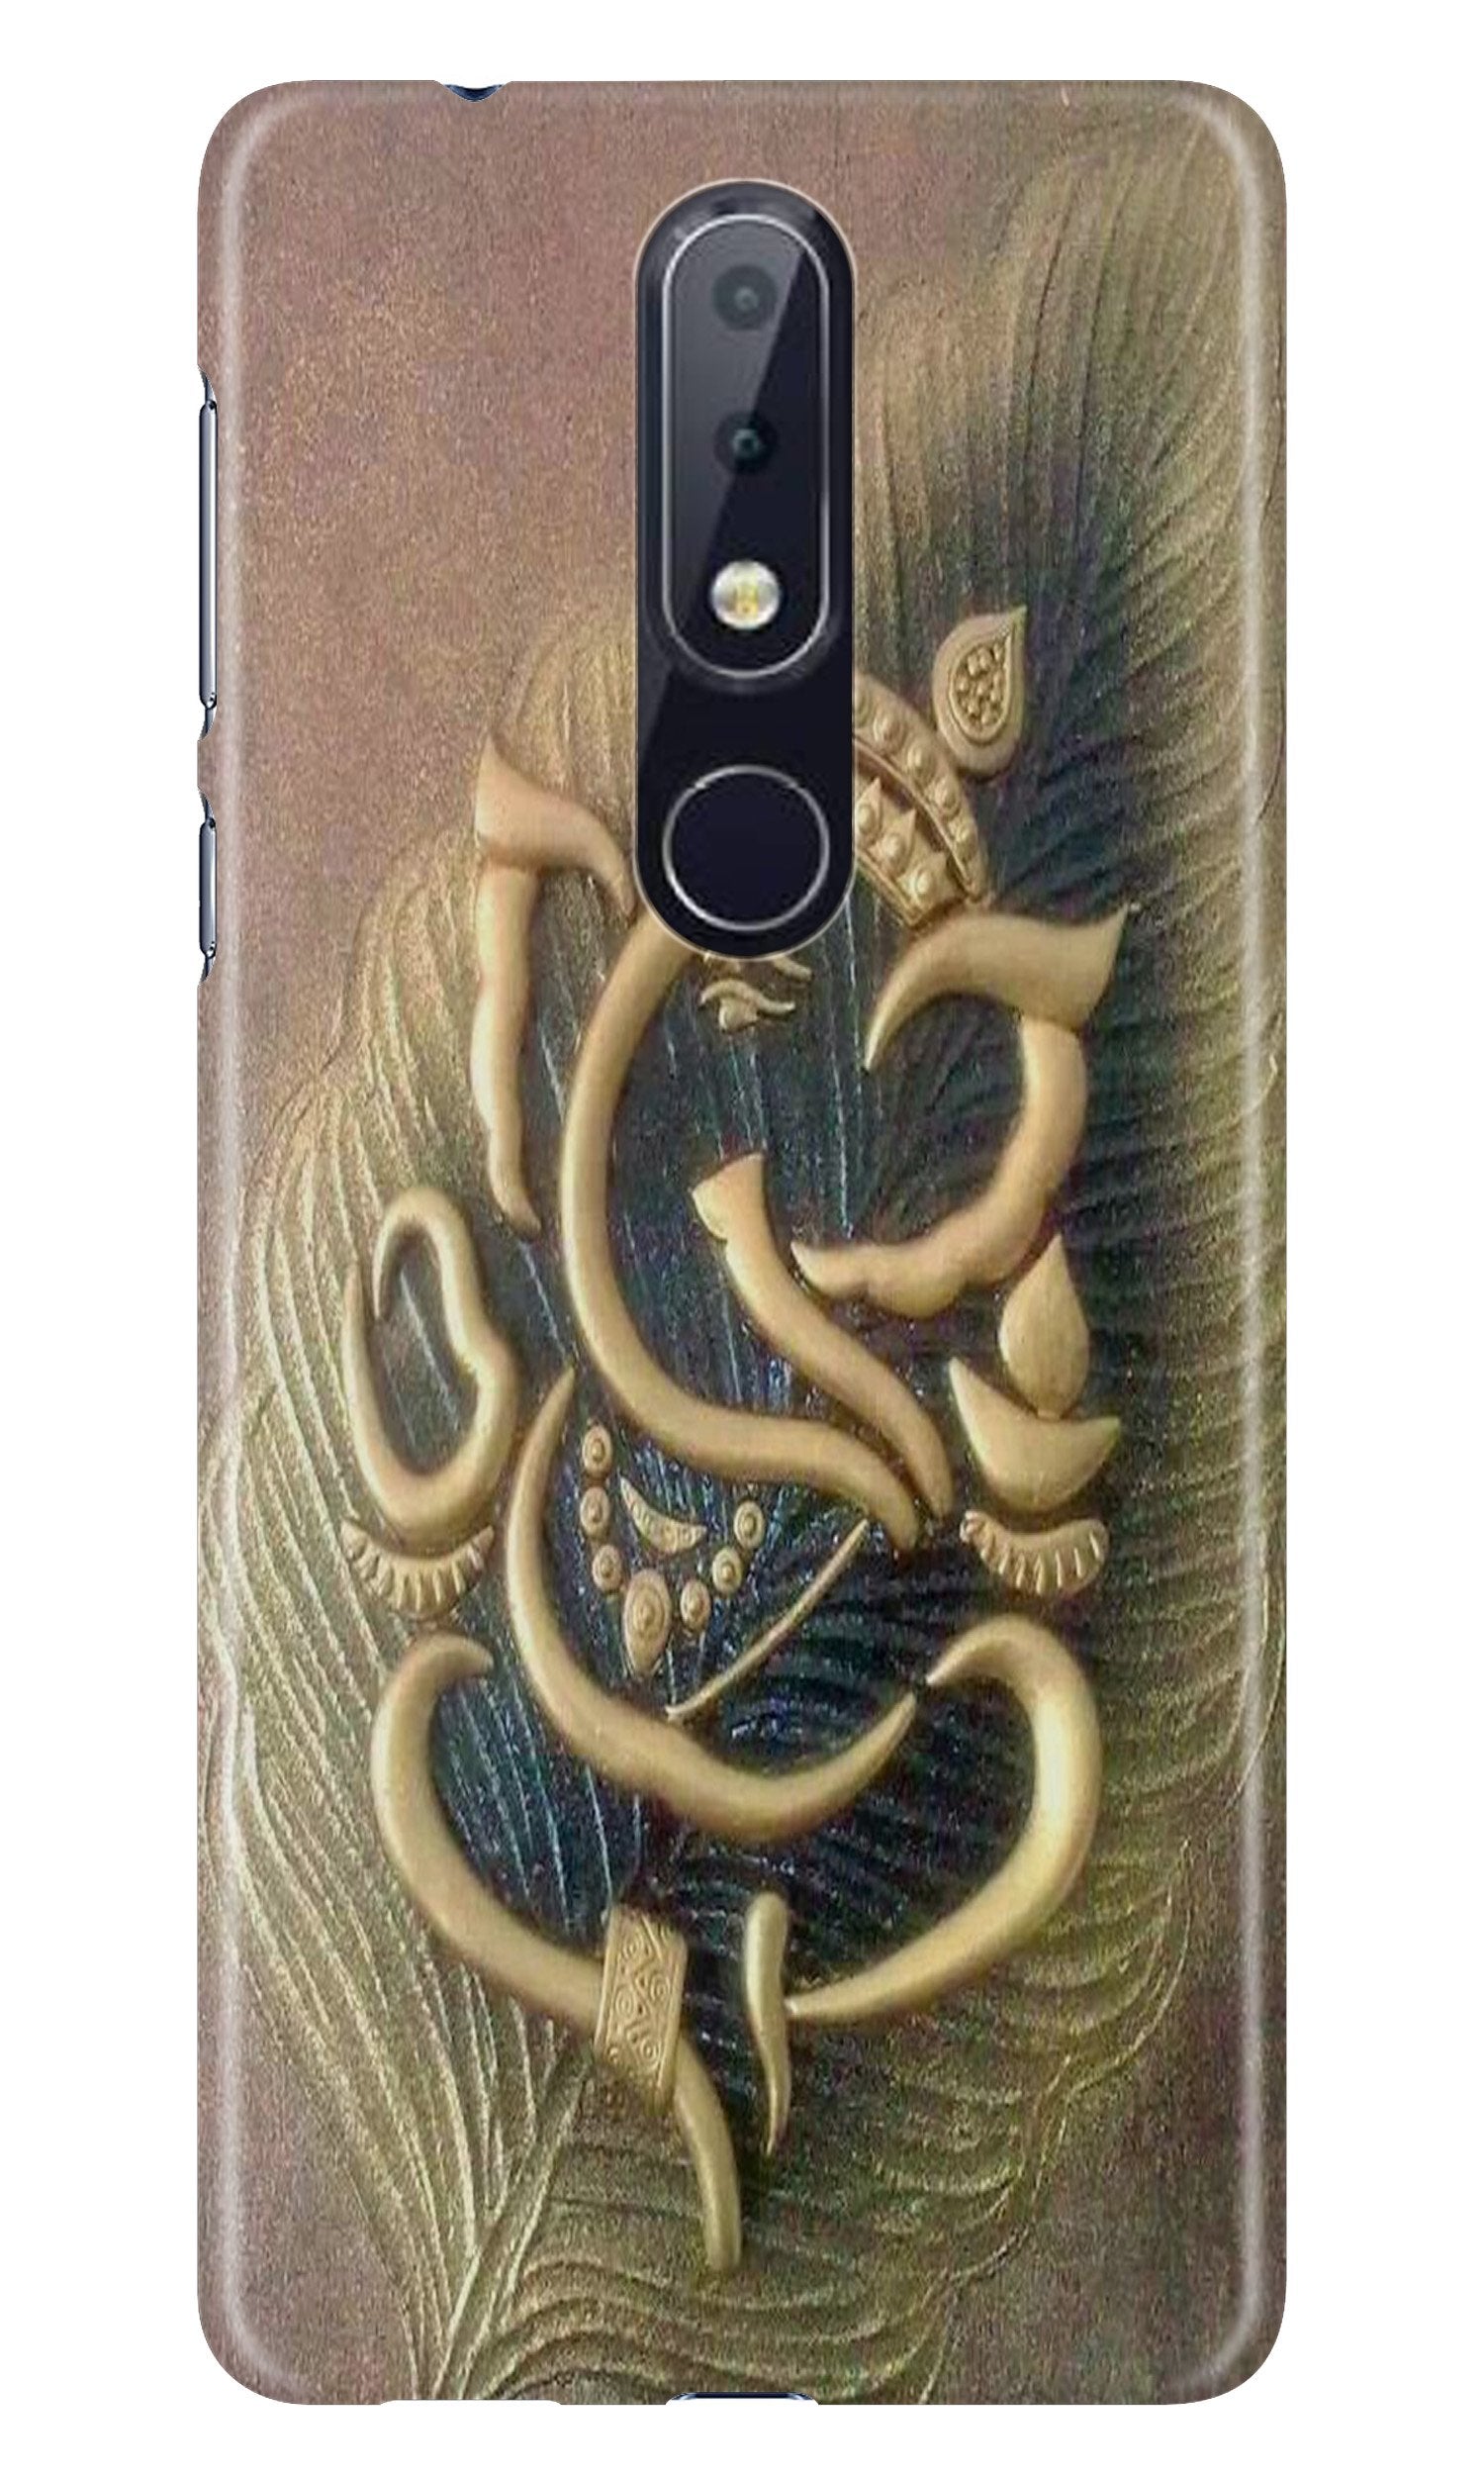 Lord Ganesha Case for Nokia 4.2